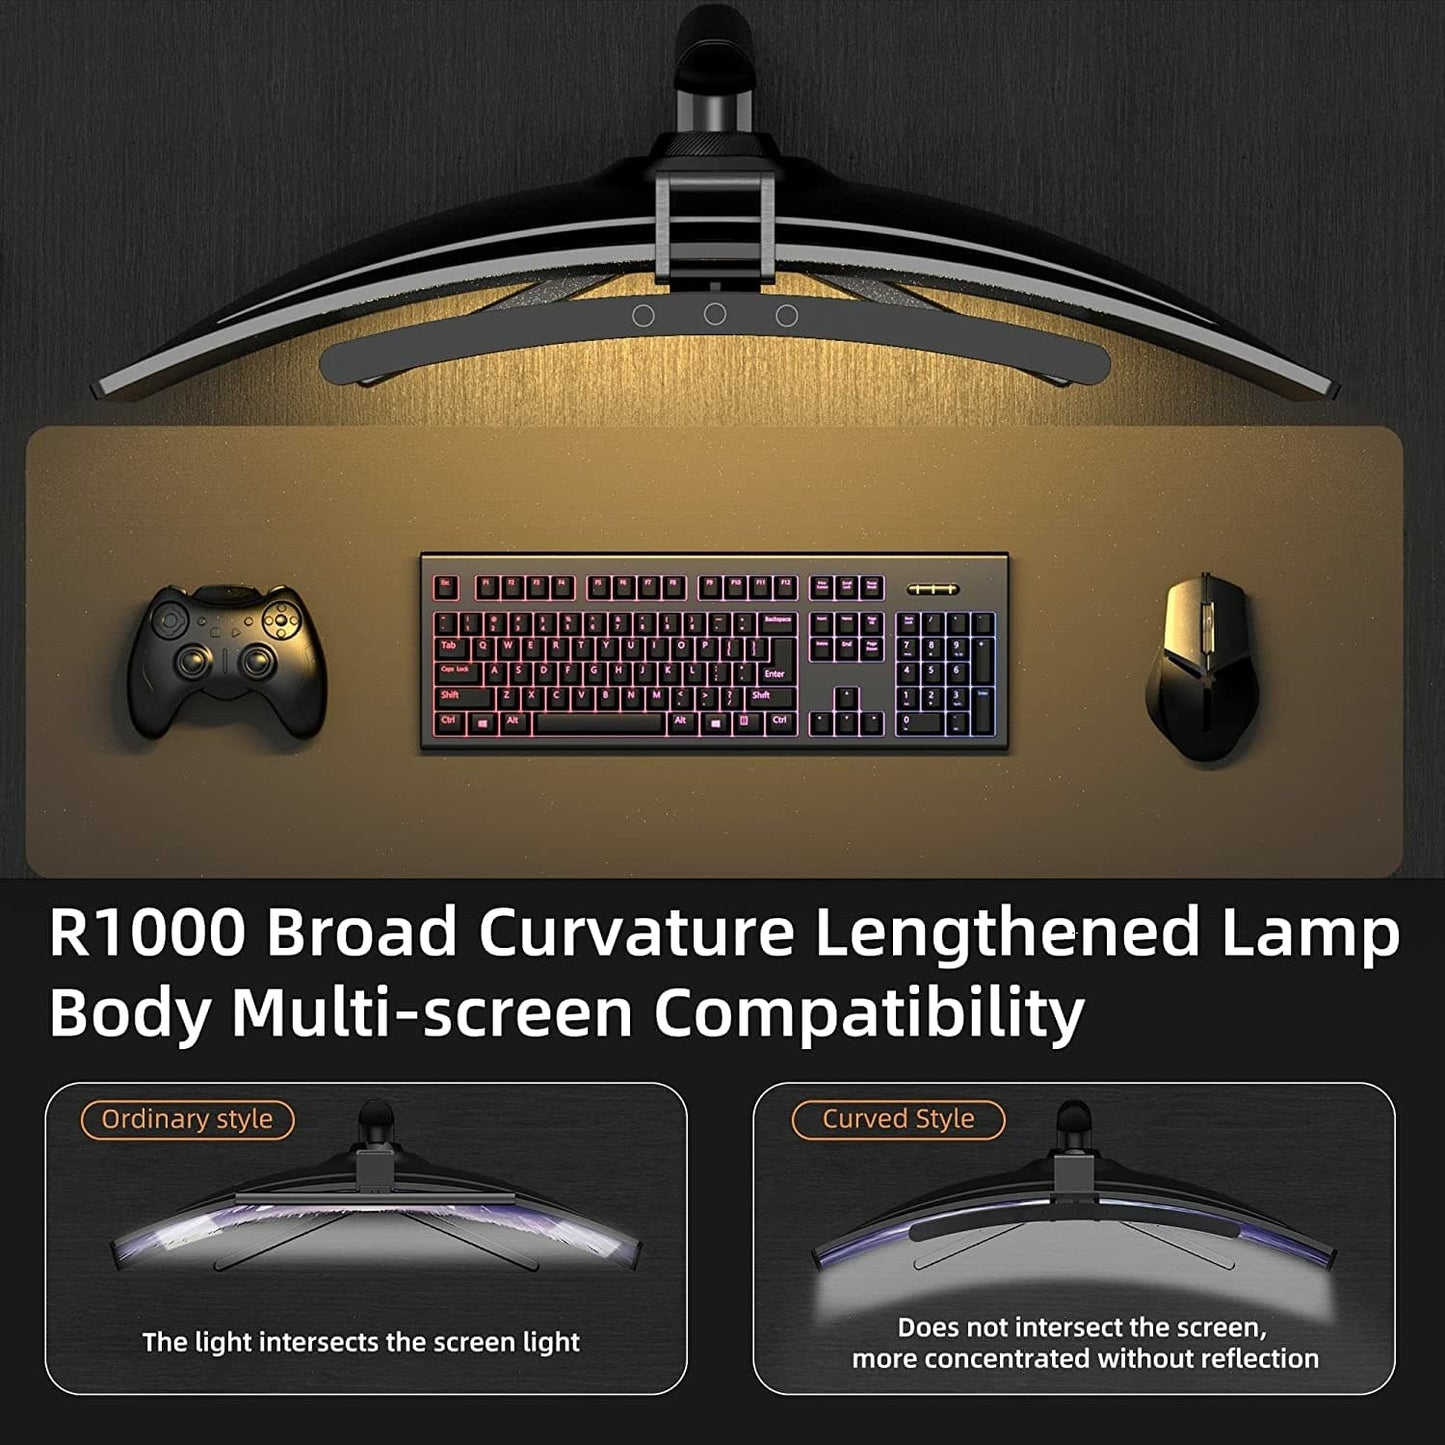 Comparison photo that shows the benefit of our LYMAX Curved Light Bar compared to a traditional straight light bar when used with a curved monitor. Perfect matching curve on our lamp is the best fit for curved or flat monitors, screens and displays.